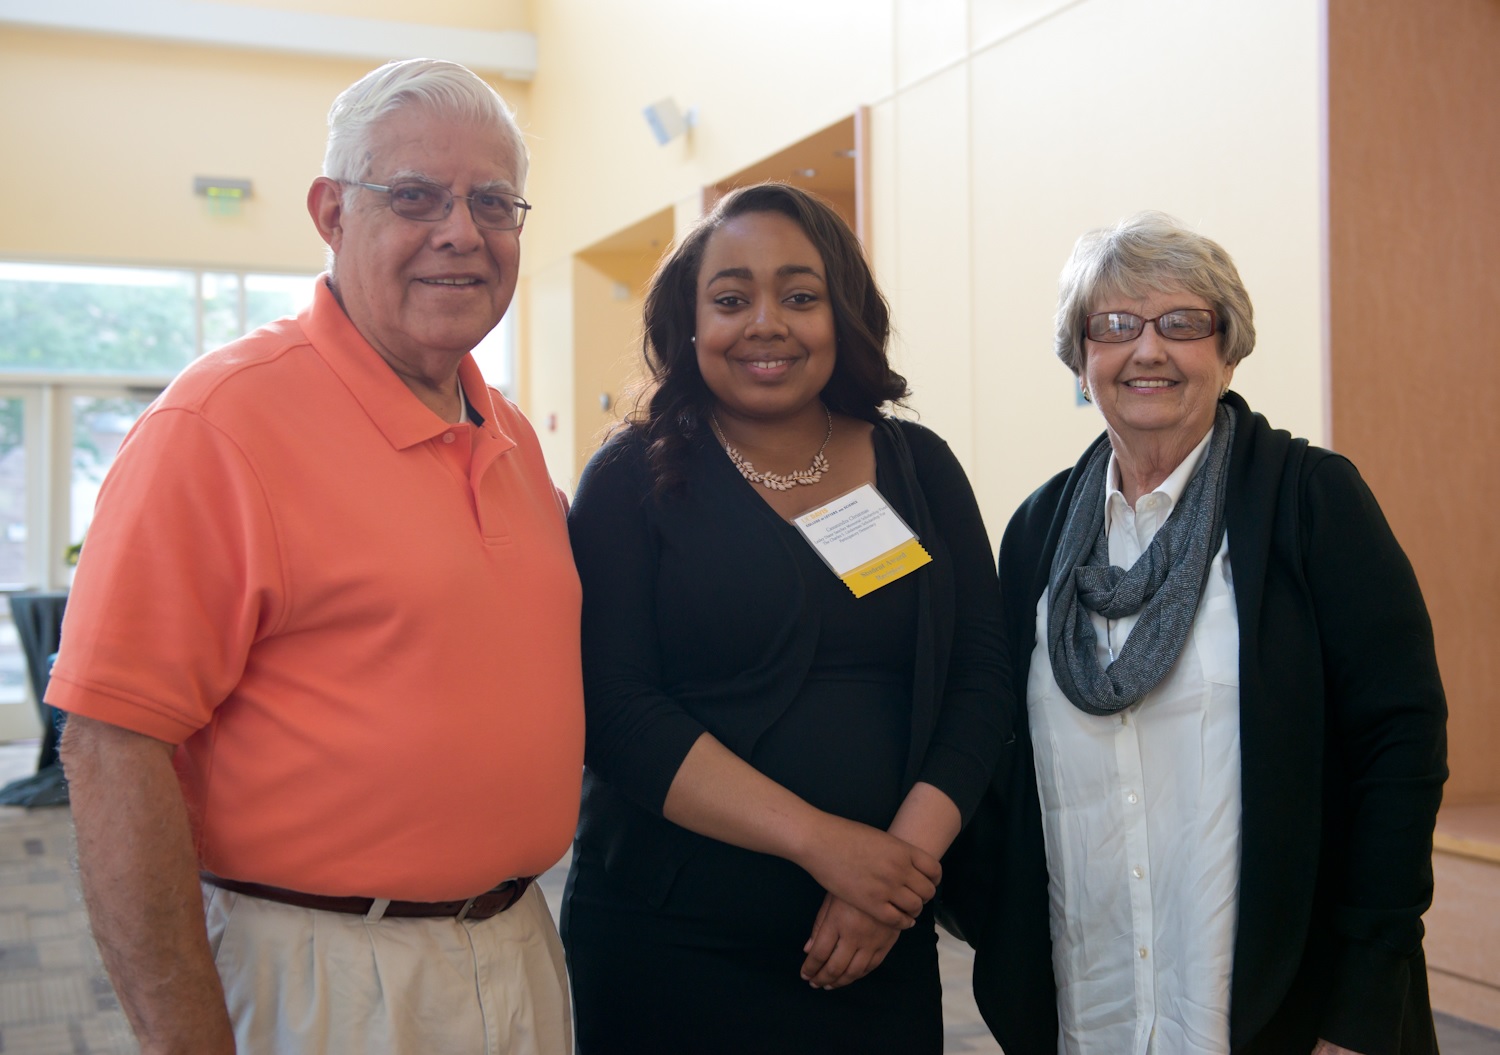 Richard and Patricia Sanchez with Cassaundra Christmas (center), recipient of the Lesley Diane Shanchez Scholarship in 2015.